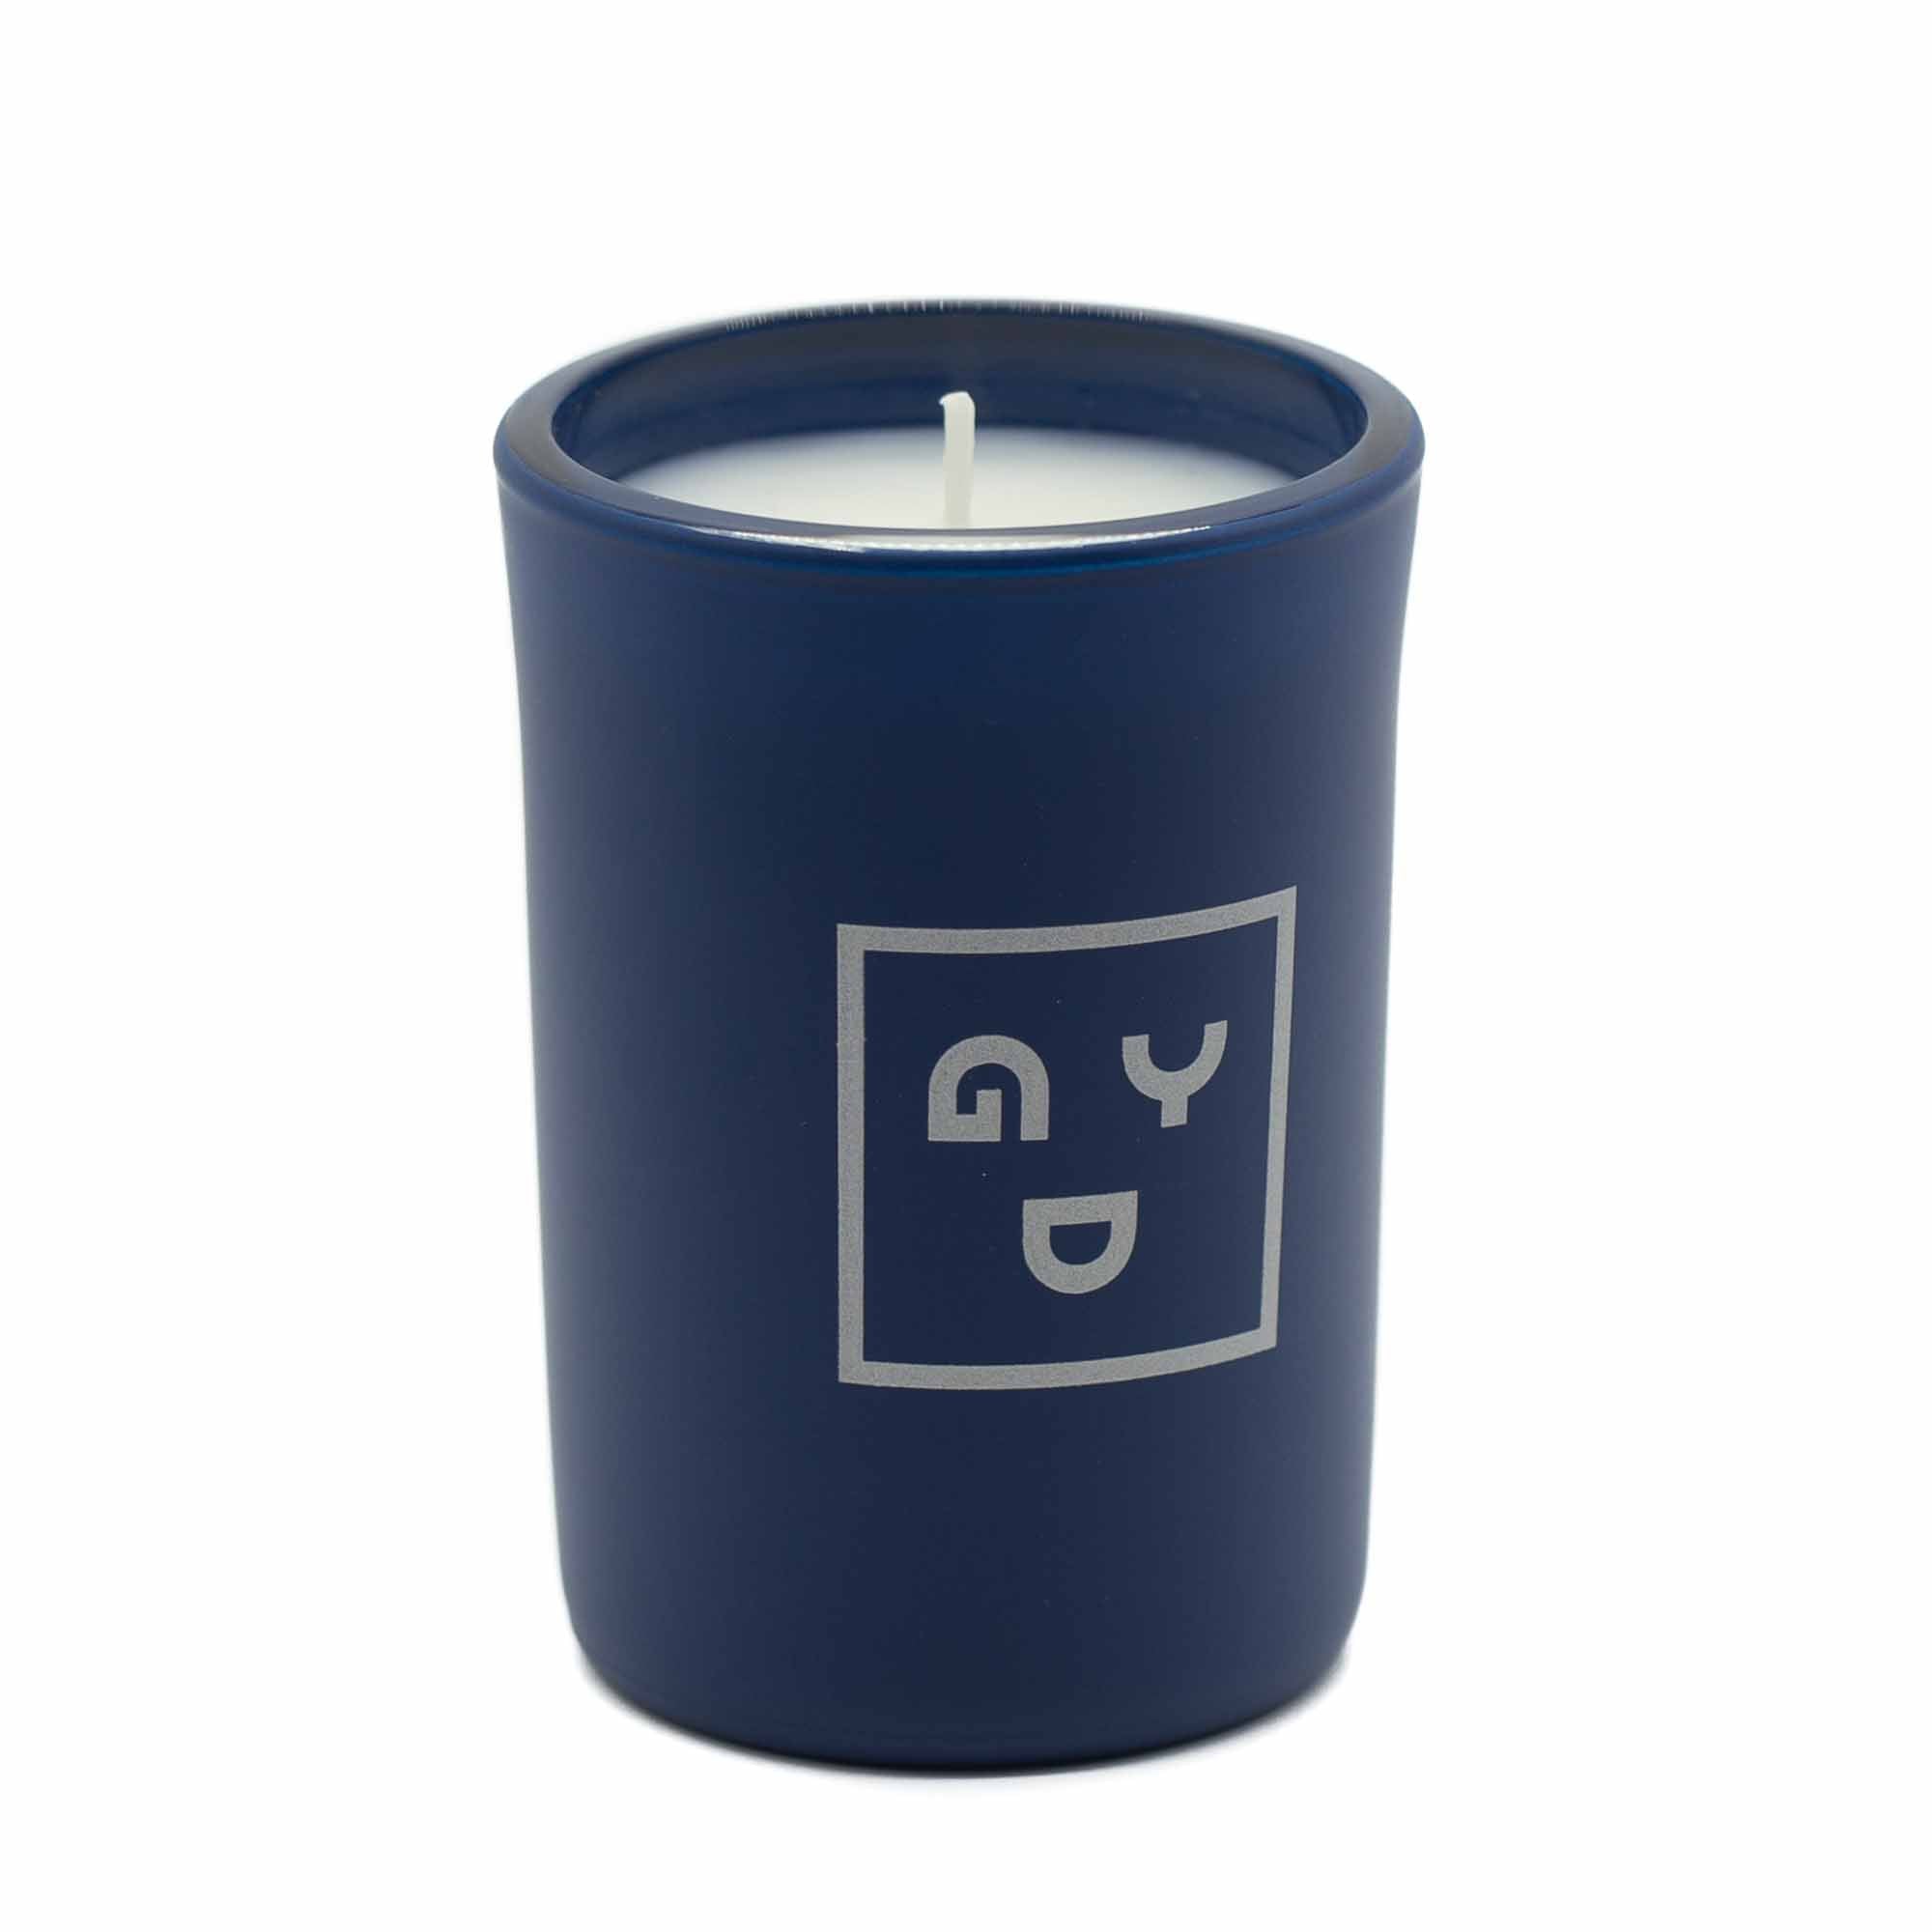 Good Dye Young - Darker Daze Candle - Mortise And Tenon